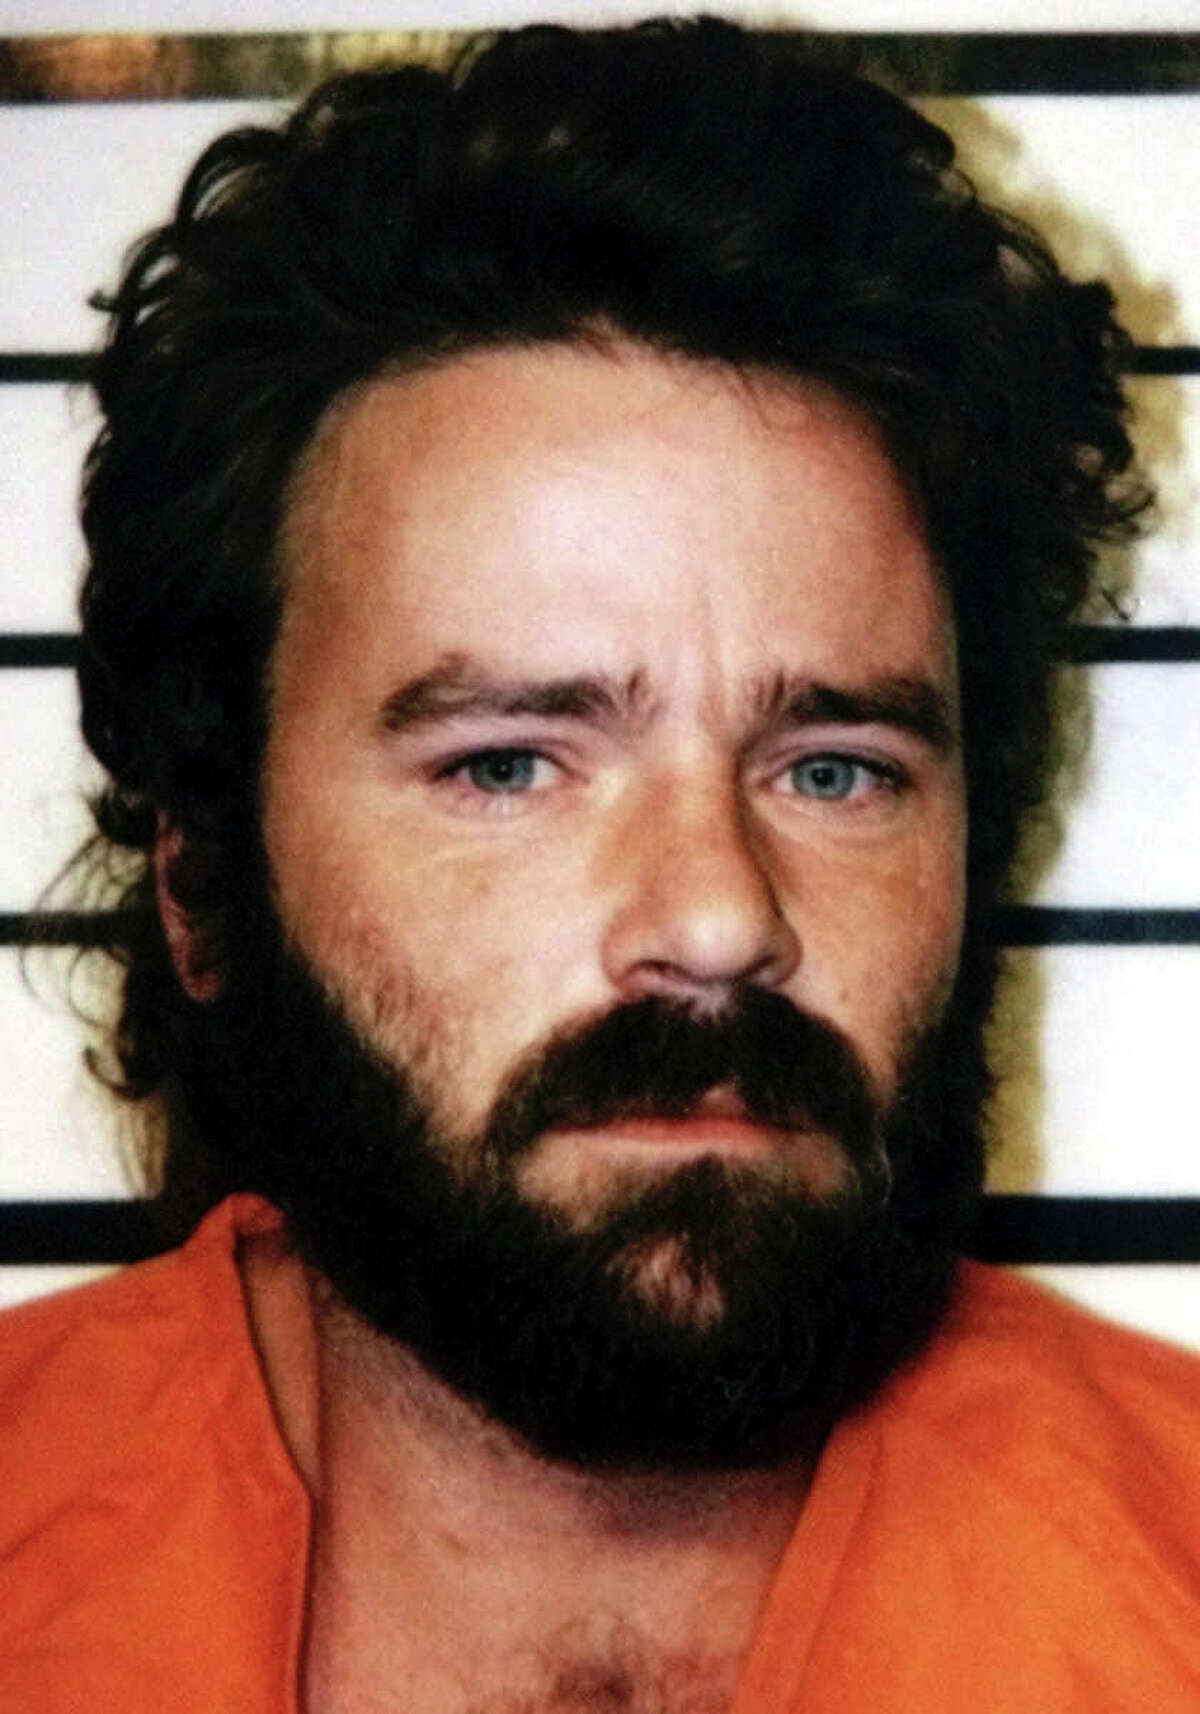 Tommy Lynn Sells, a 35-year-old drifter who once rode railroads and worked in carnivals, is seen on Jan. 11, 2000, after he was arrested in Val Verde County near the Texas-Mexico border in Del Rio. Sells confessed to the attack of two girls near Del Rio, to the rape and slaying of a 13-year-old girl in Kentucky last May and to assorted other crimes in at least five additional states, according to investigators.